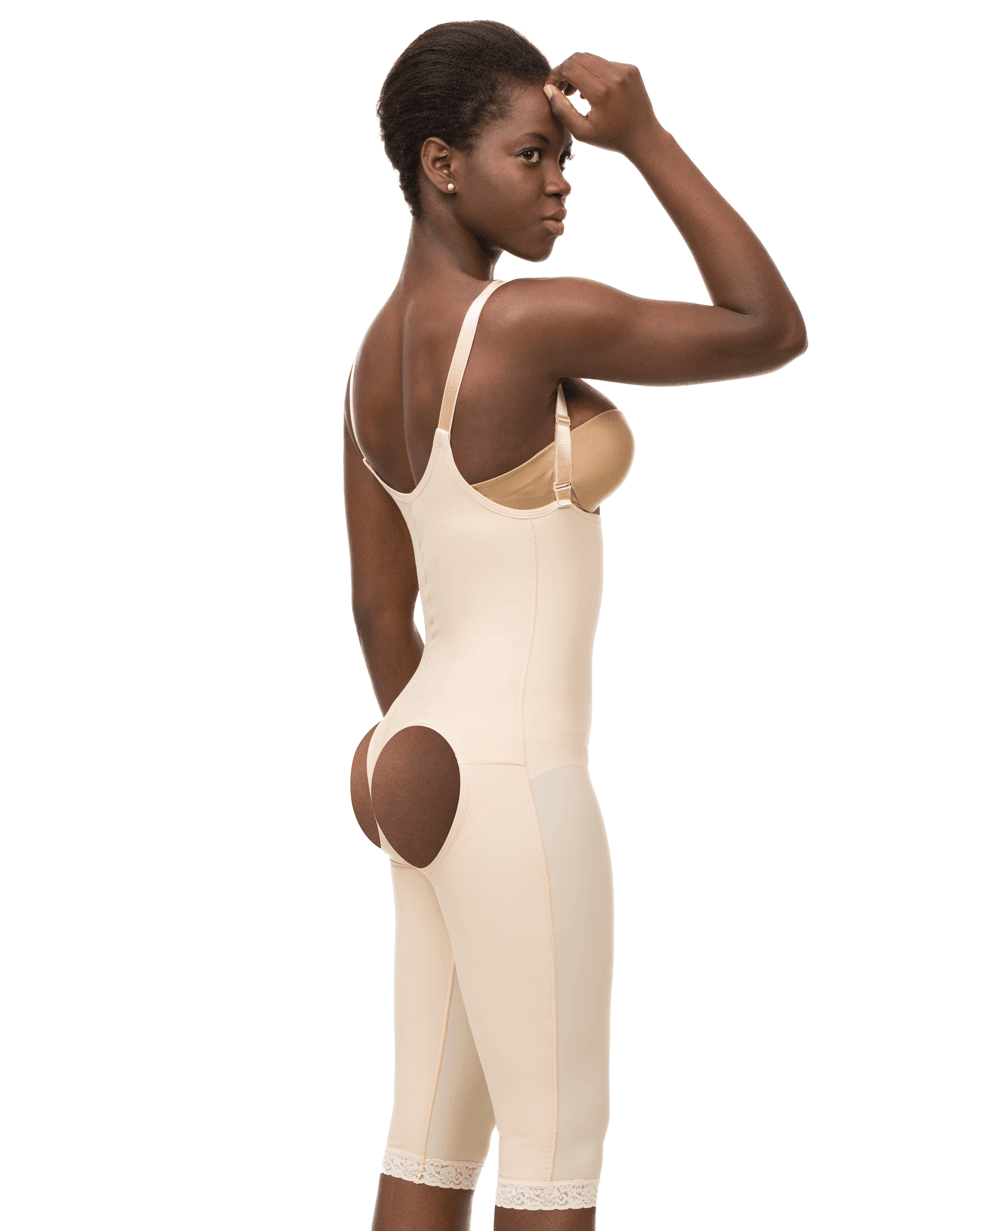 Isavela 2nd Stage Body Suit Ankle Length Plastic Ghana